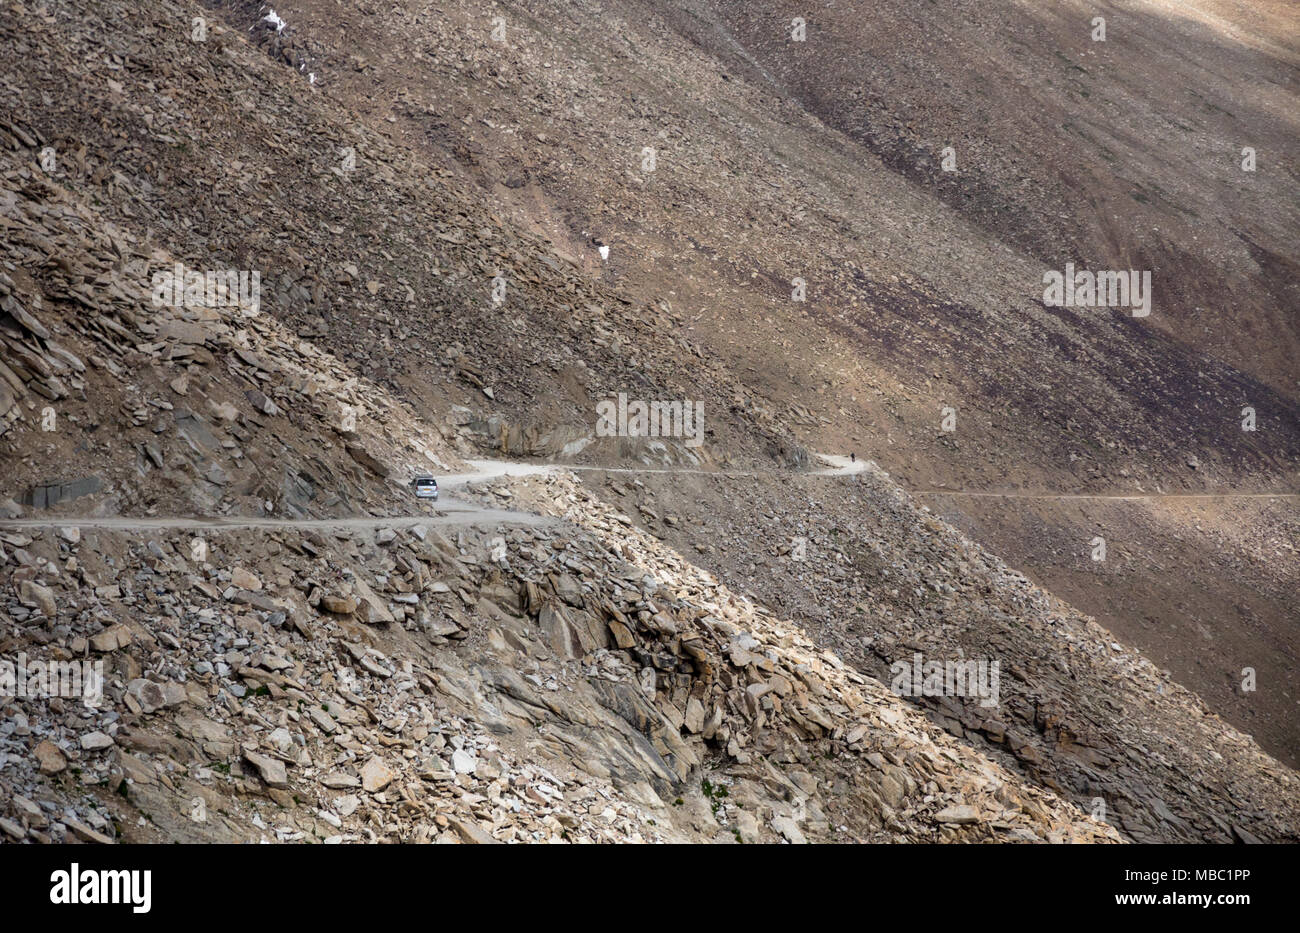 With little moisture in the dry air of the Himalayan rain shadow, there is no vegetation to hide view of road to Khardung pass, north of Leh, India Stock Photo